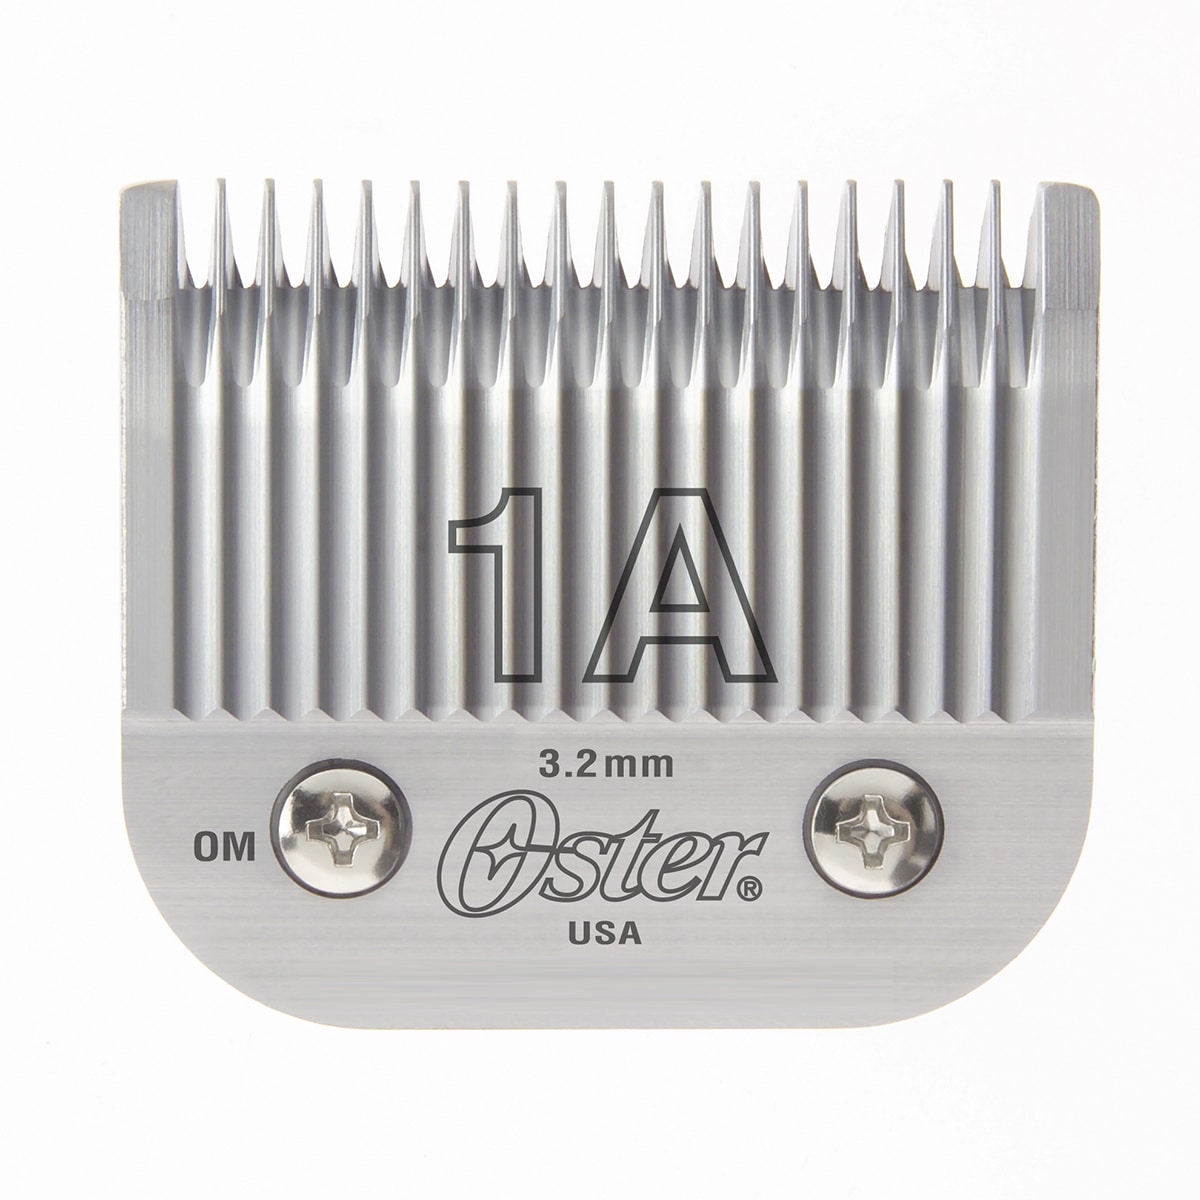 Oster Classic 76 Size 1A Blade #76918-076 - Barber Depot